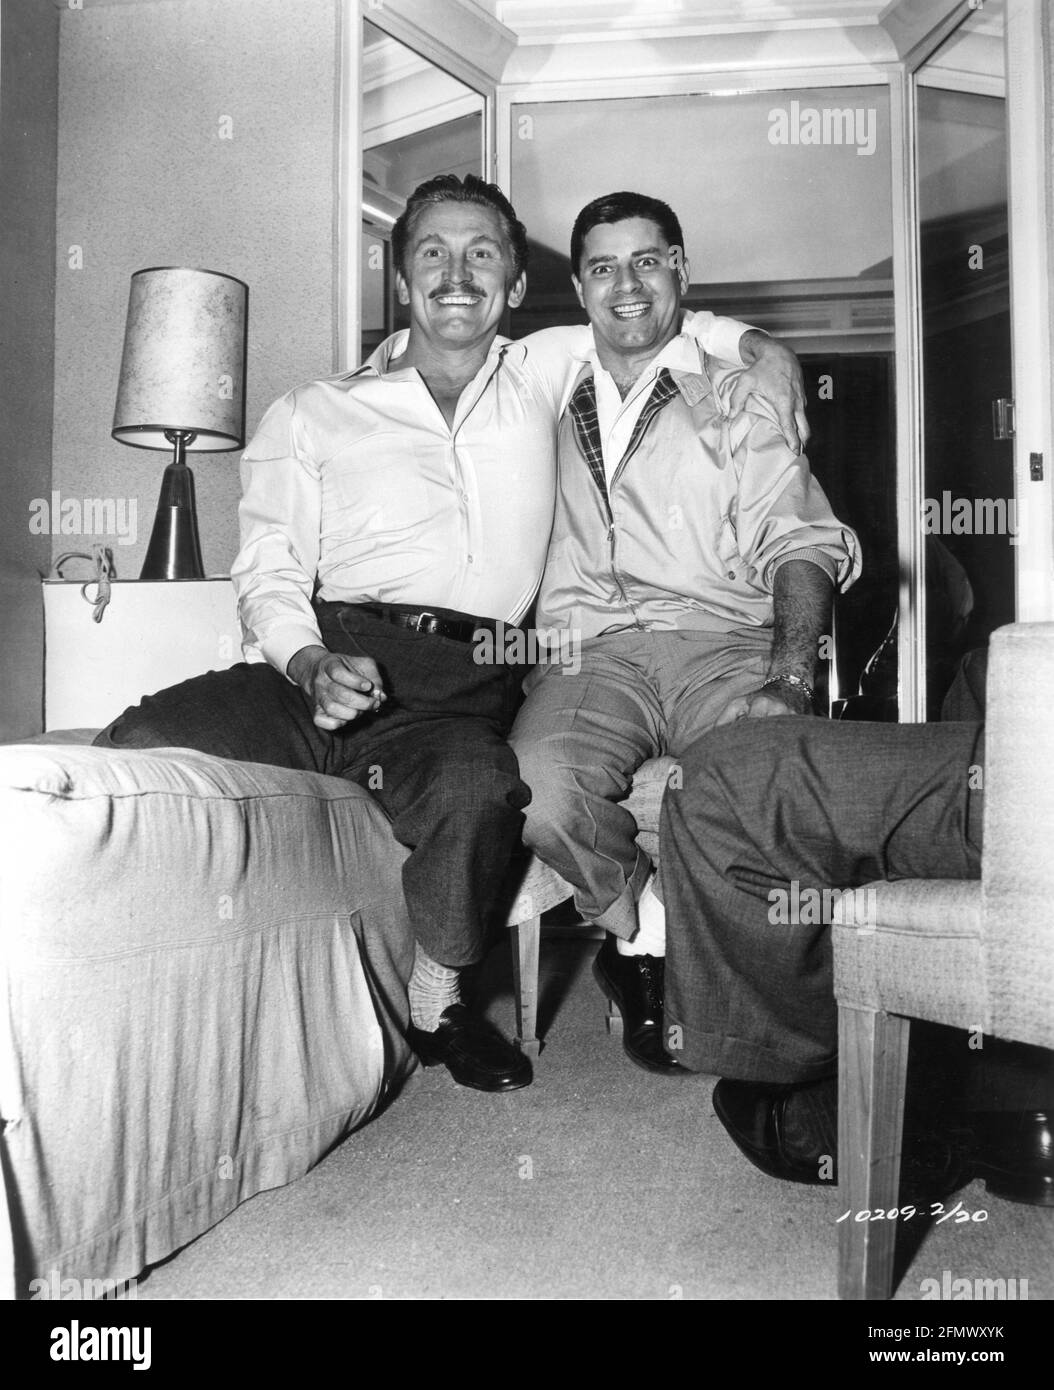 KIRK DOUGLAS with visitor JERRY LEWIS in his Dressing Room during filming of GUNFIGHT AT THE O.K. CORRAL 1957 director JOHN STURGES screenplay Leon Uris music Dimitri Tiomkin producer Hal B. Wallis  Wallis-Hazen / Paramount Pictures Stock Photo